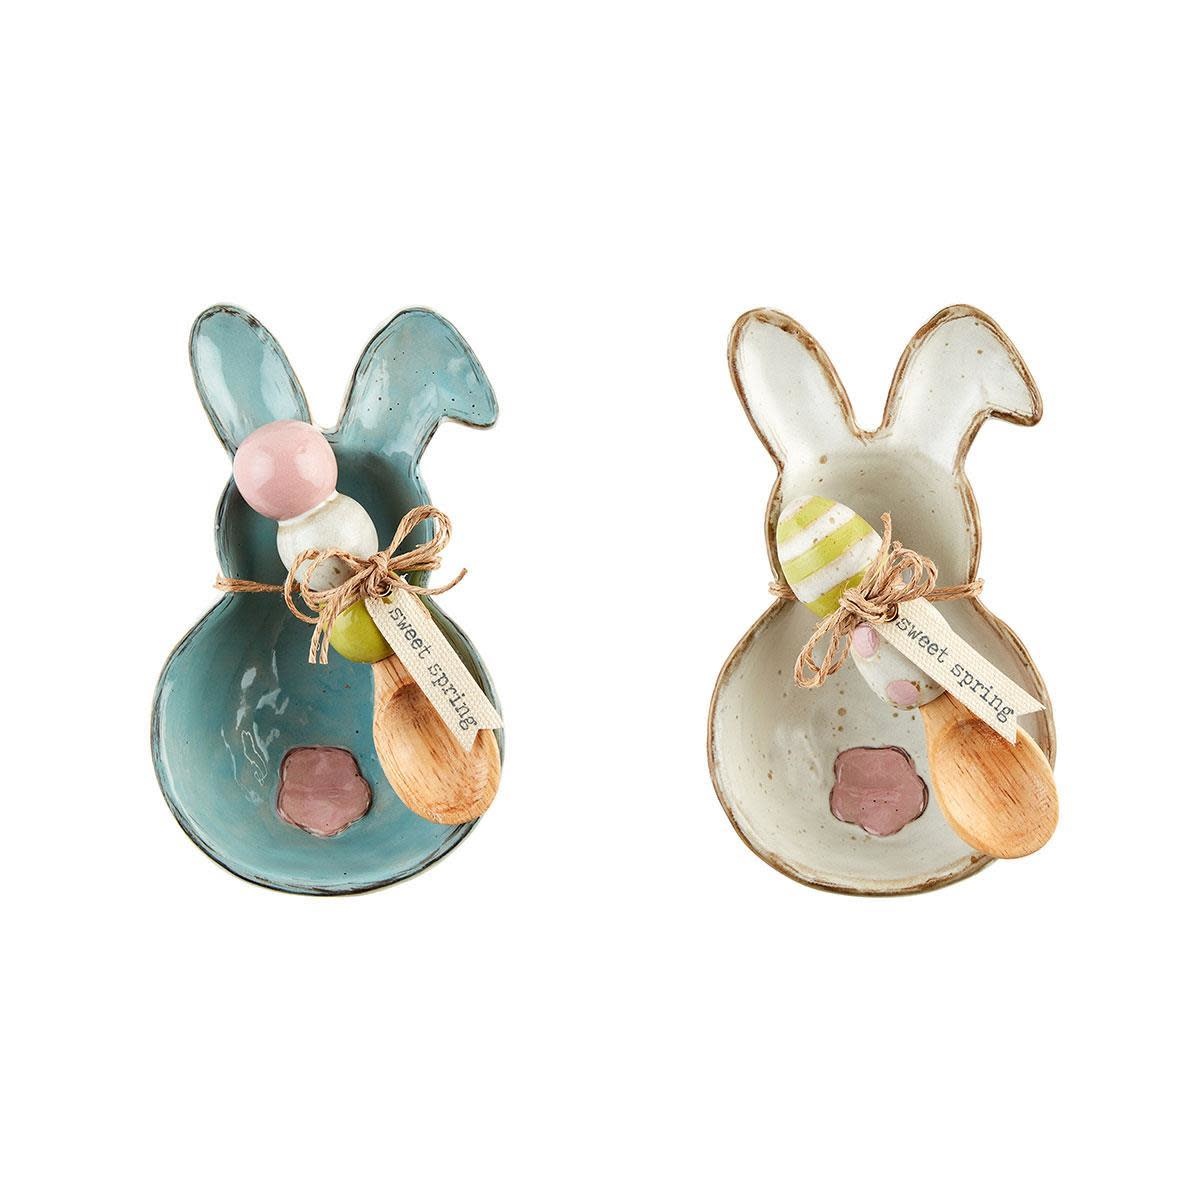 MUD PIE BUNNY CANDY DISH SETS